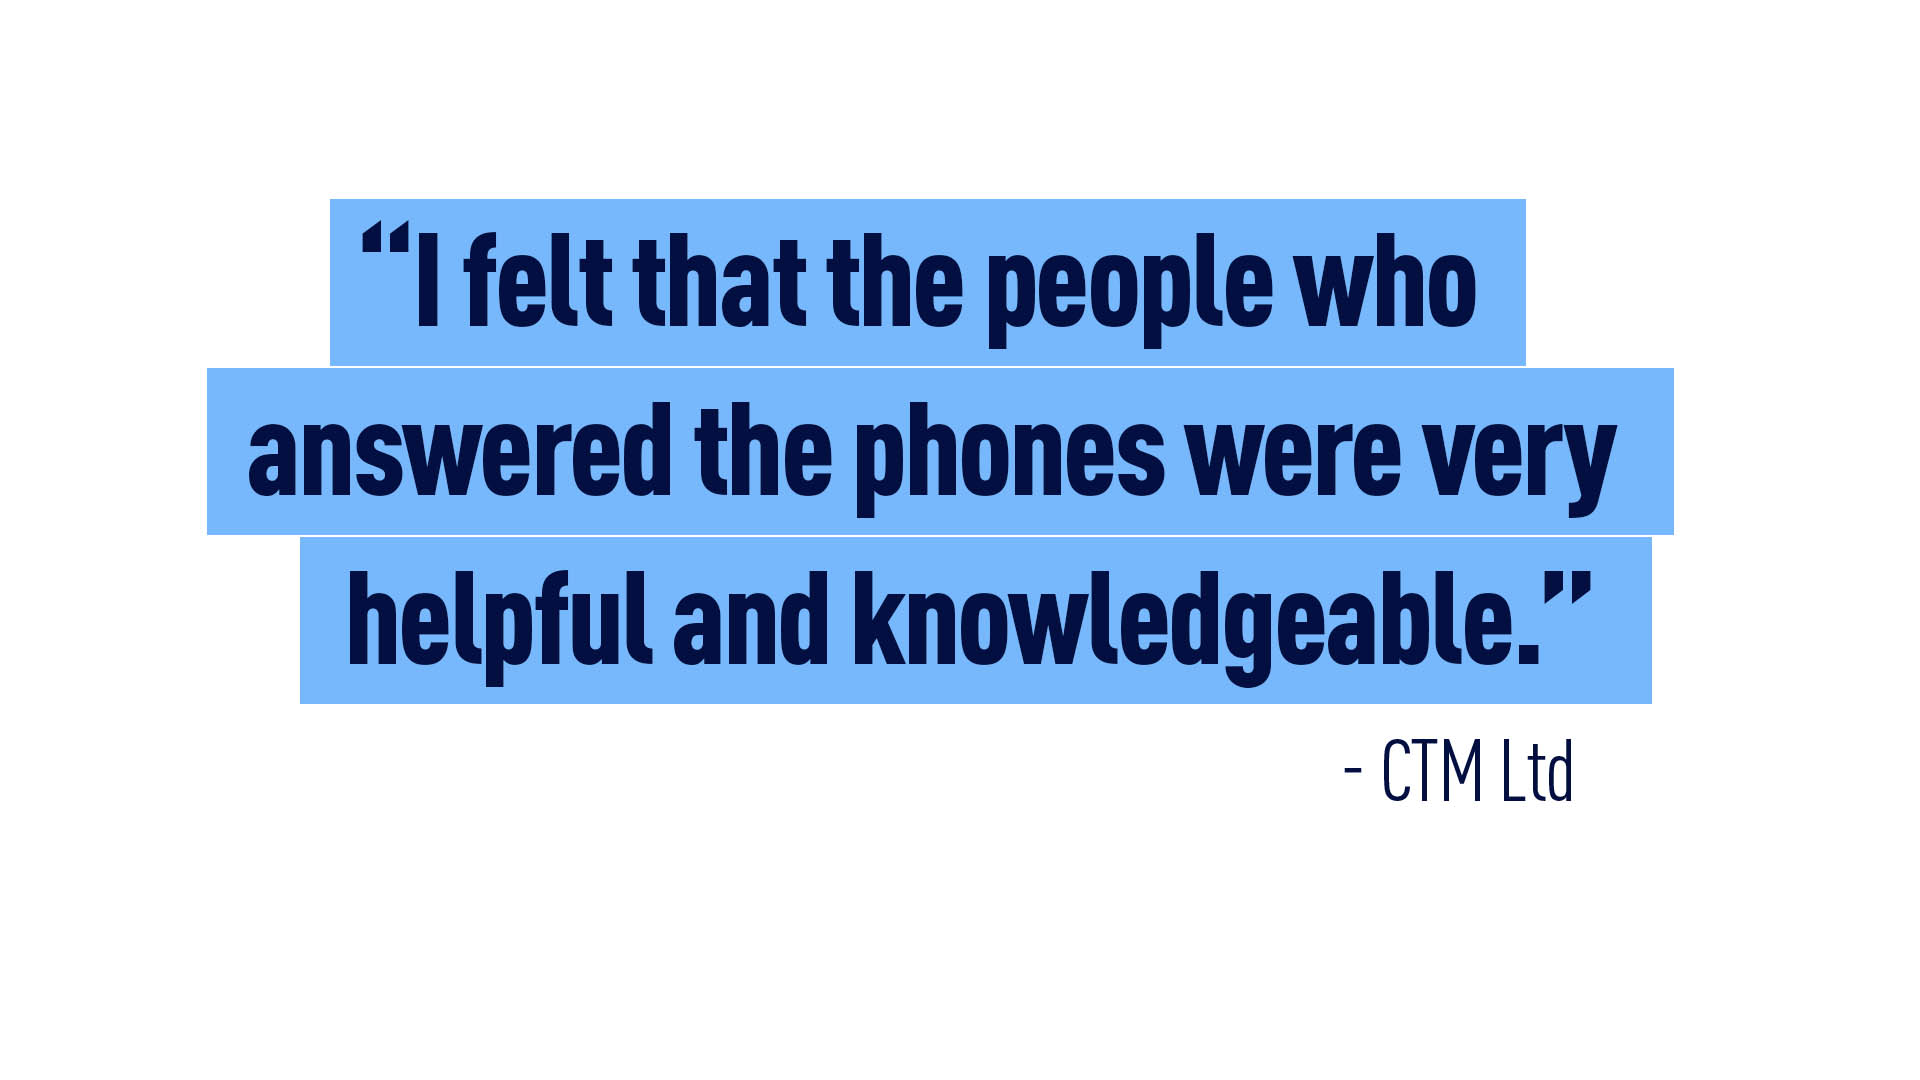 “I felt that the people who answered the phones were very helpful and knowledgeable.” – CTM Ltd